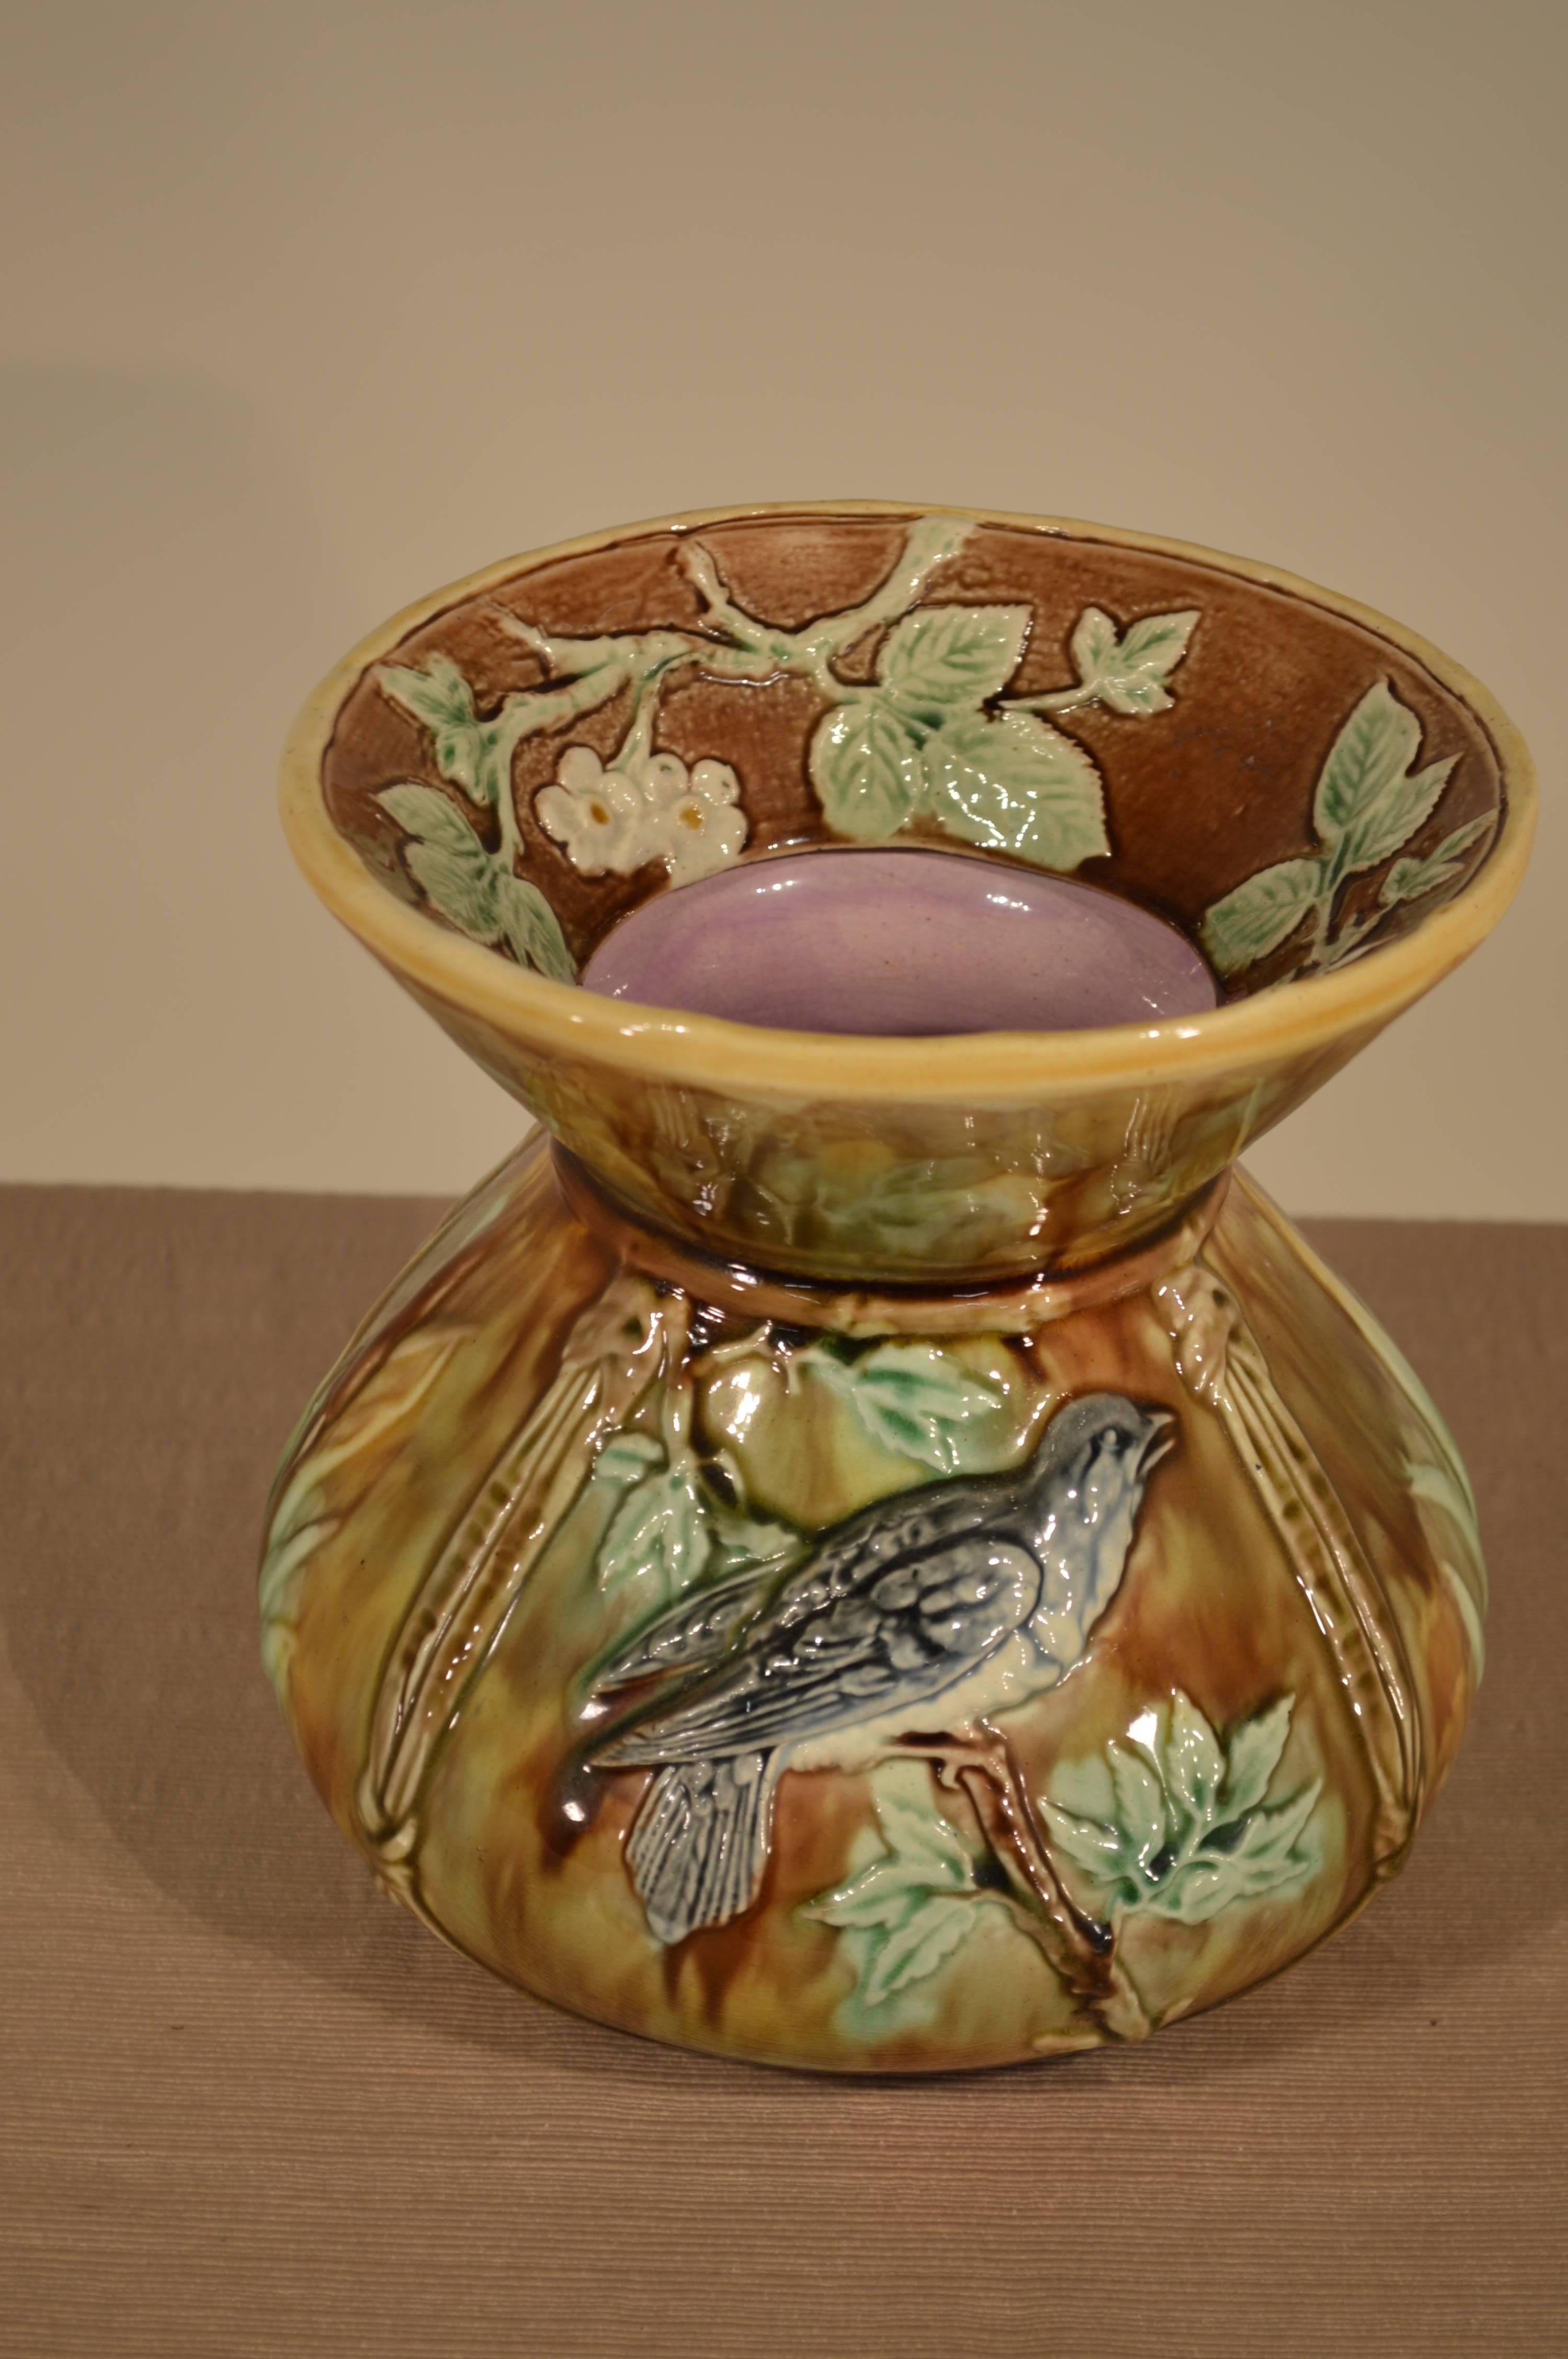 19th century English spitoon with bird and flower decoration. Lovely color and shape.